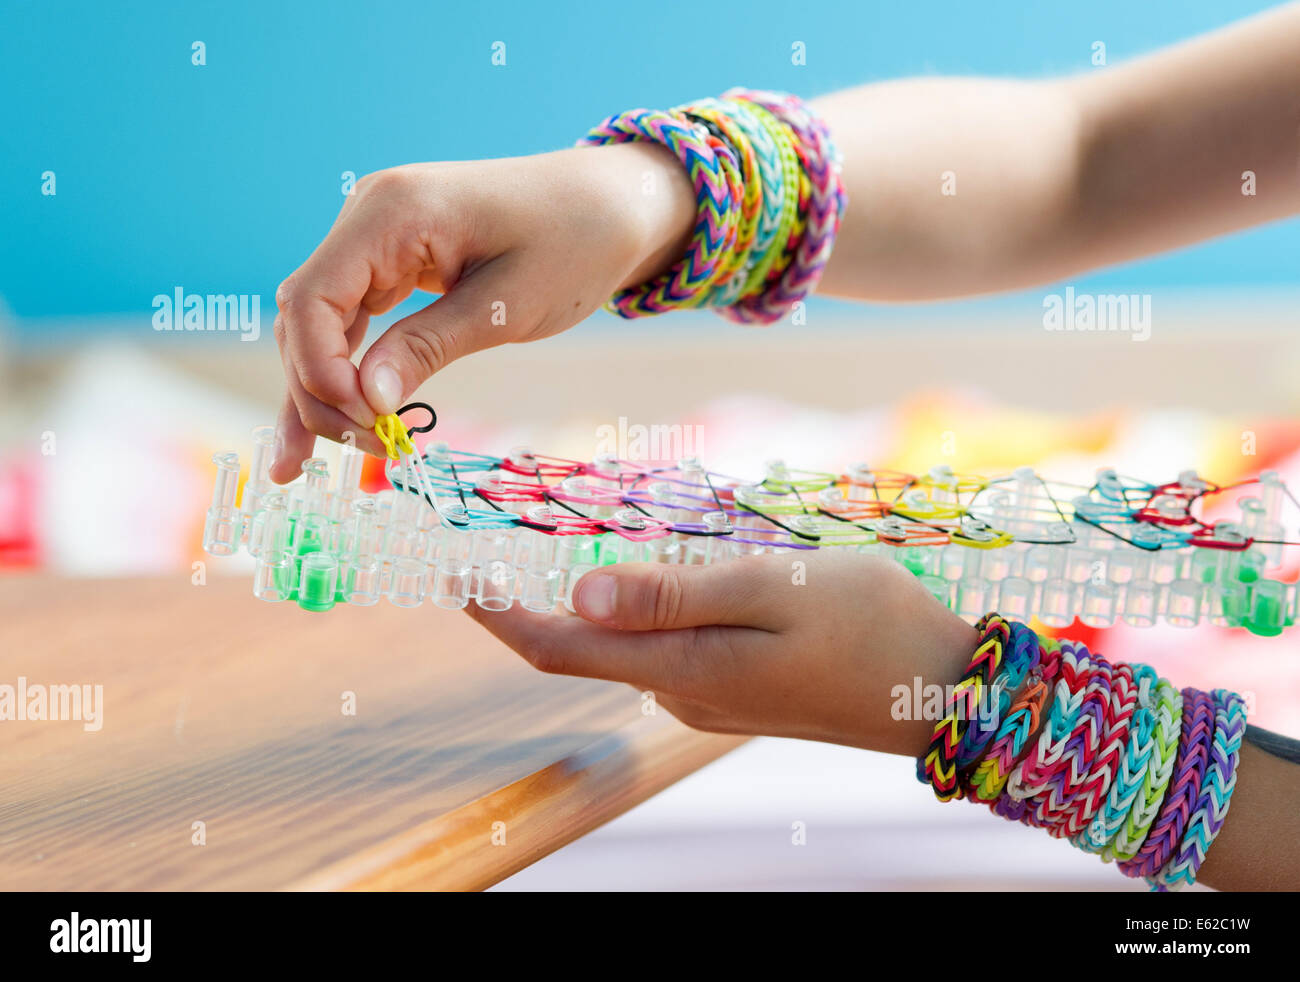 Colorful Rainbow Loom Bracelet Rubber Bands Stock Photo 204463927